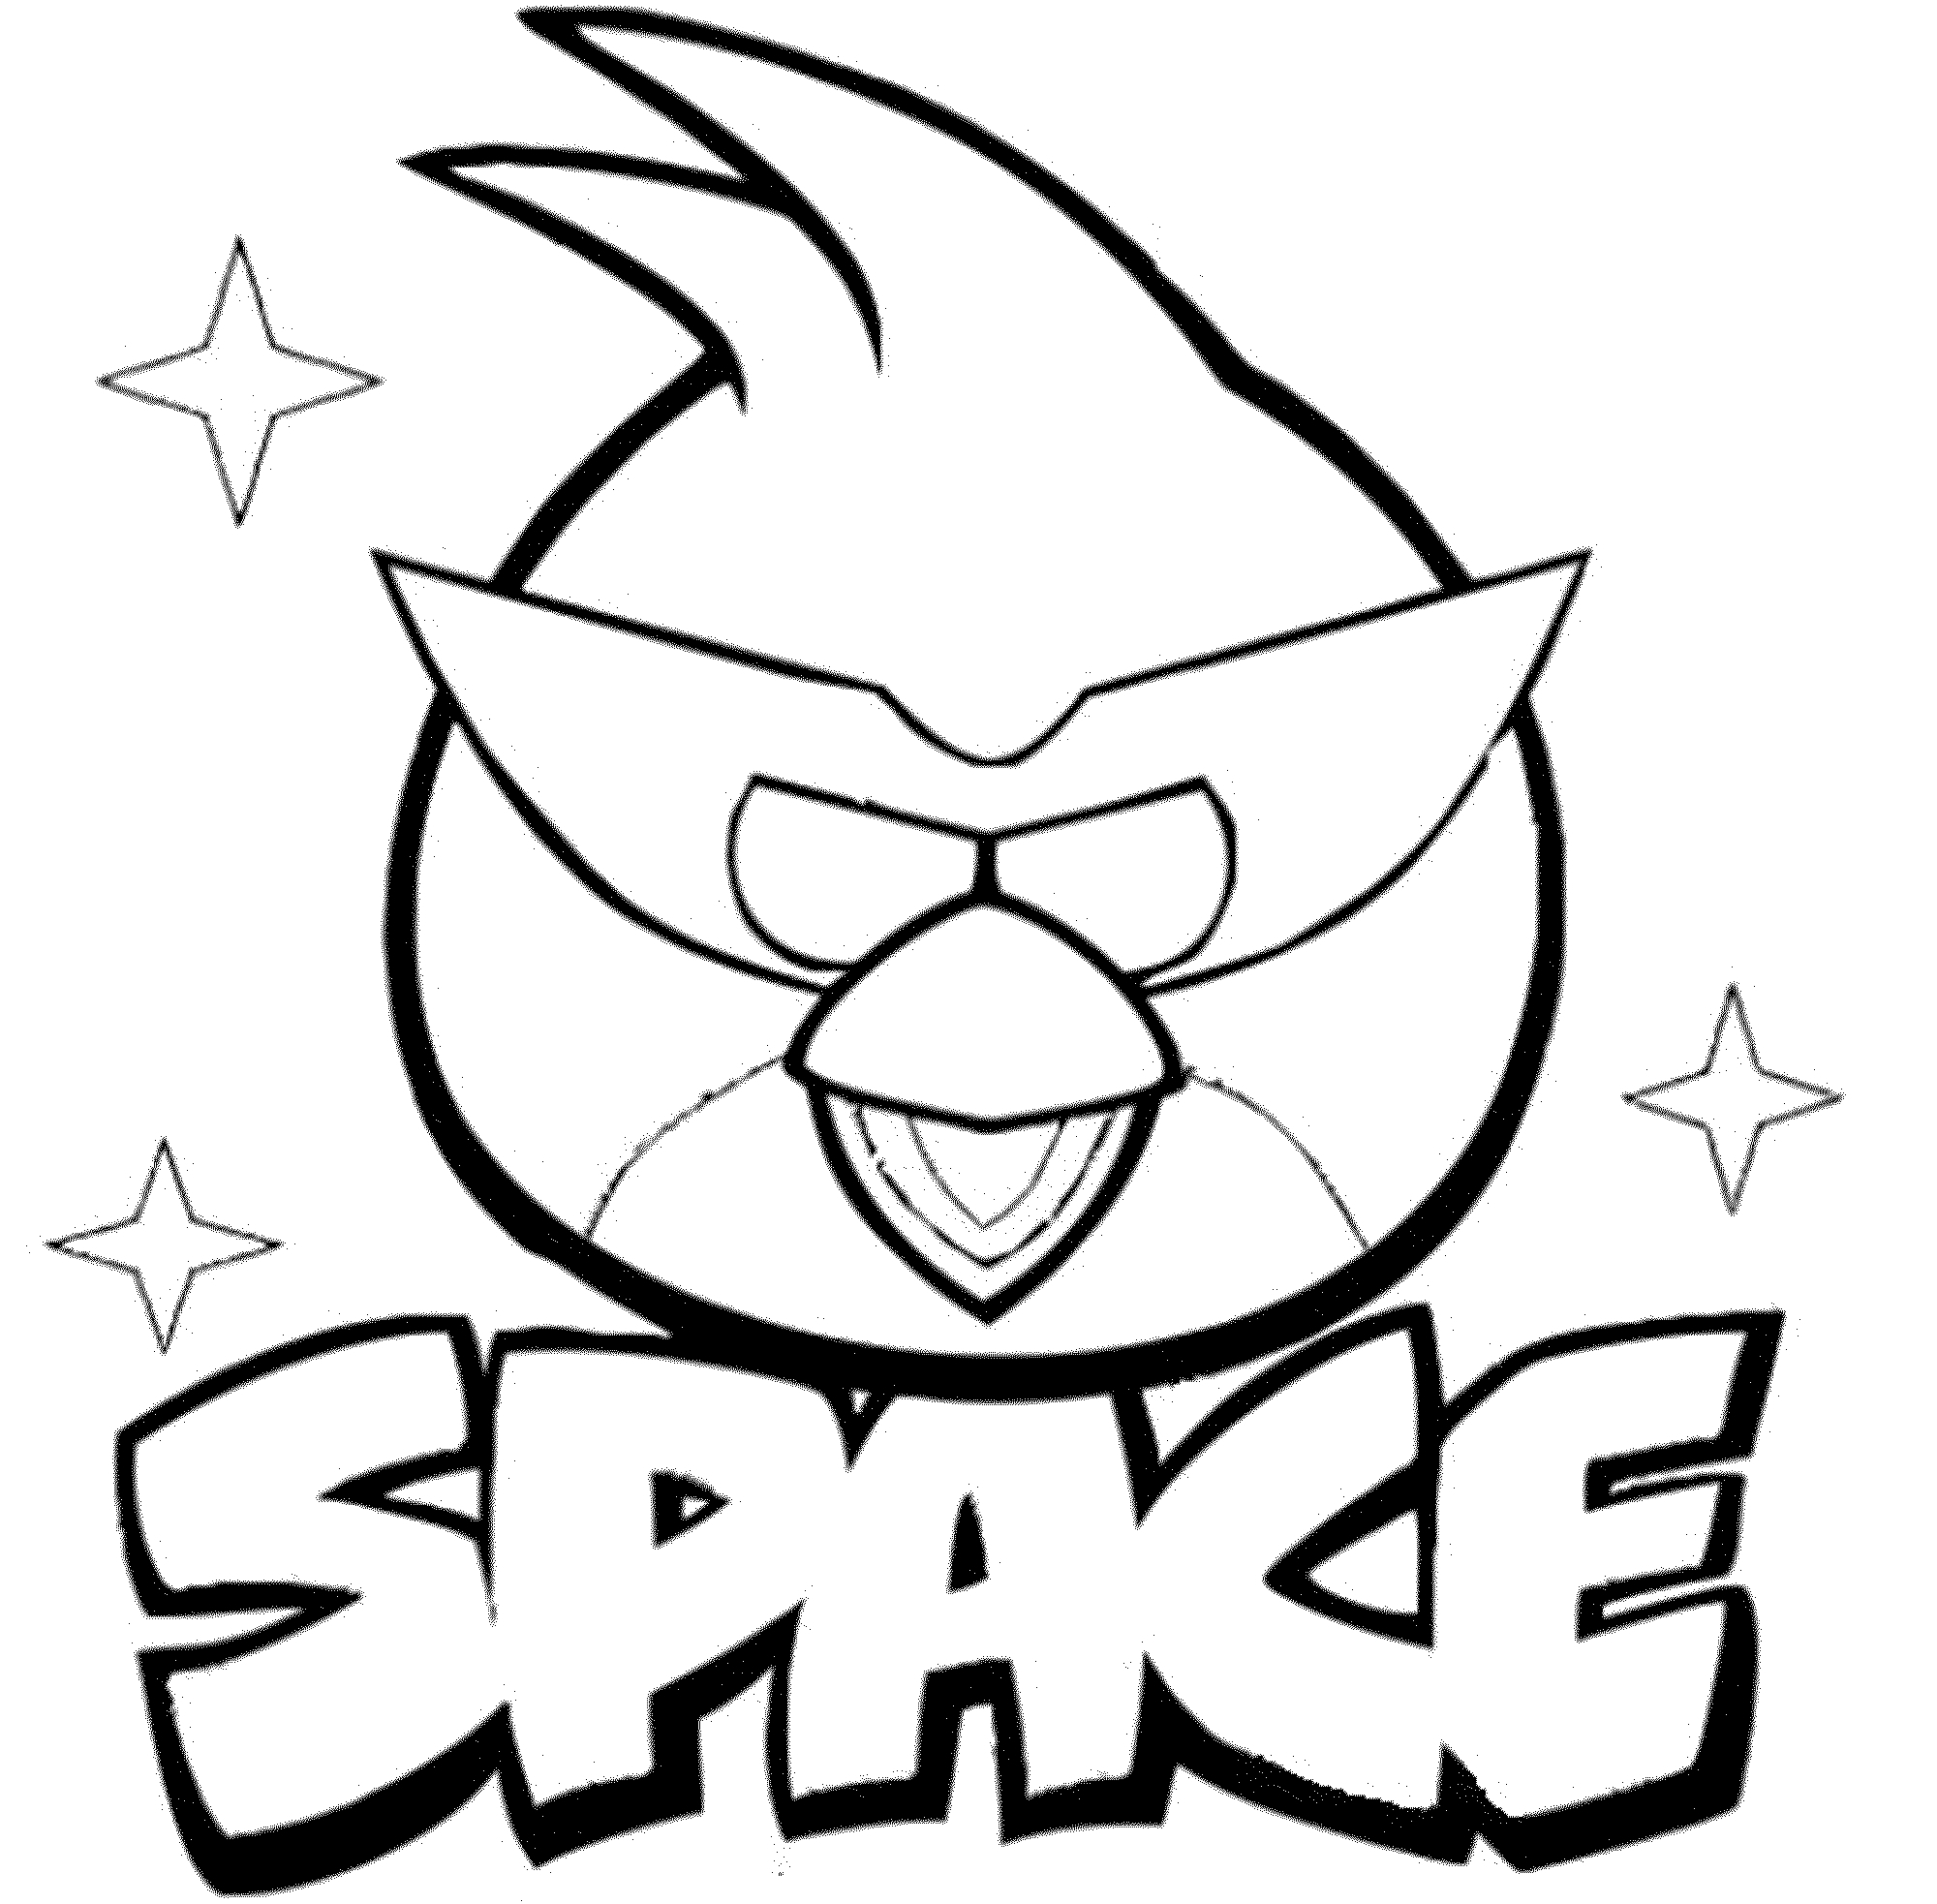 Bird Coloring Pages Angry Birds Space Coloring Pages Coloringstar - Free Printable Angry Birds Space Coloring Pages